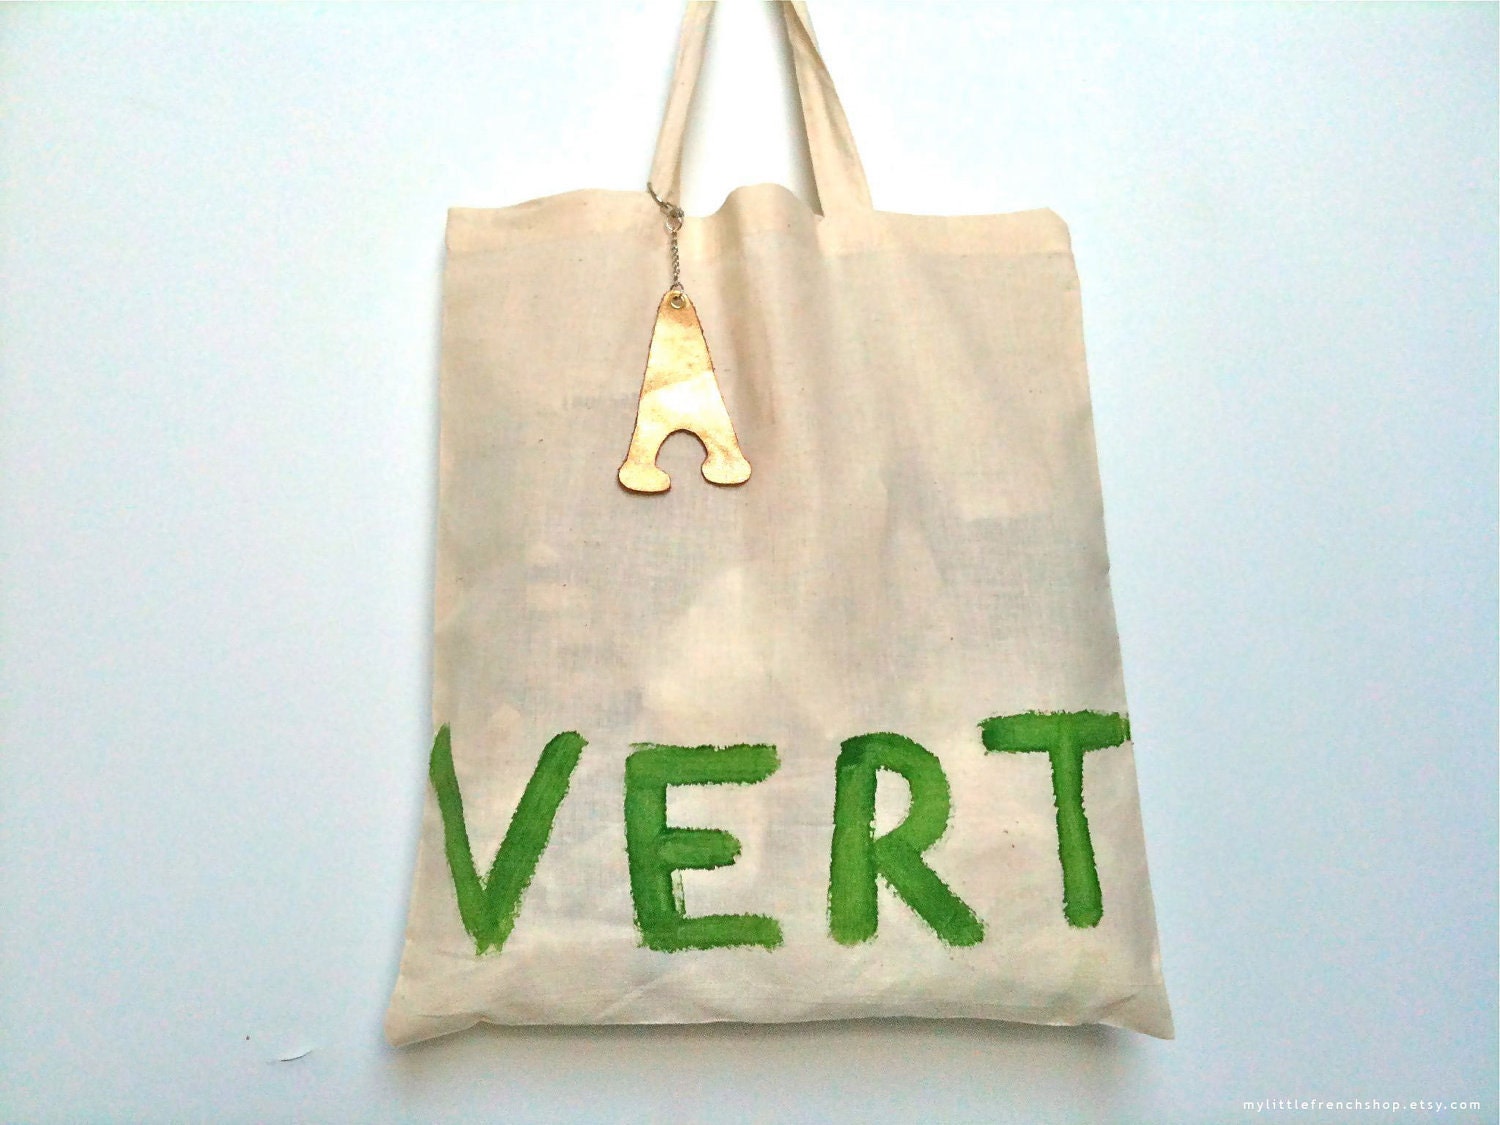 Vert TOTE Bag - French - Natural/Green - Eco - Eiffel Tower - MyLittleFrenchShop